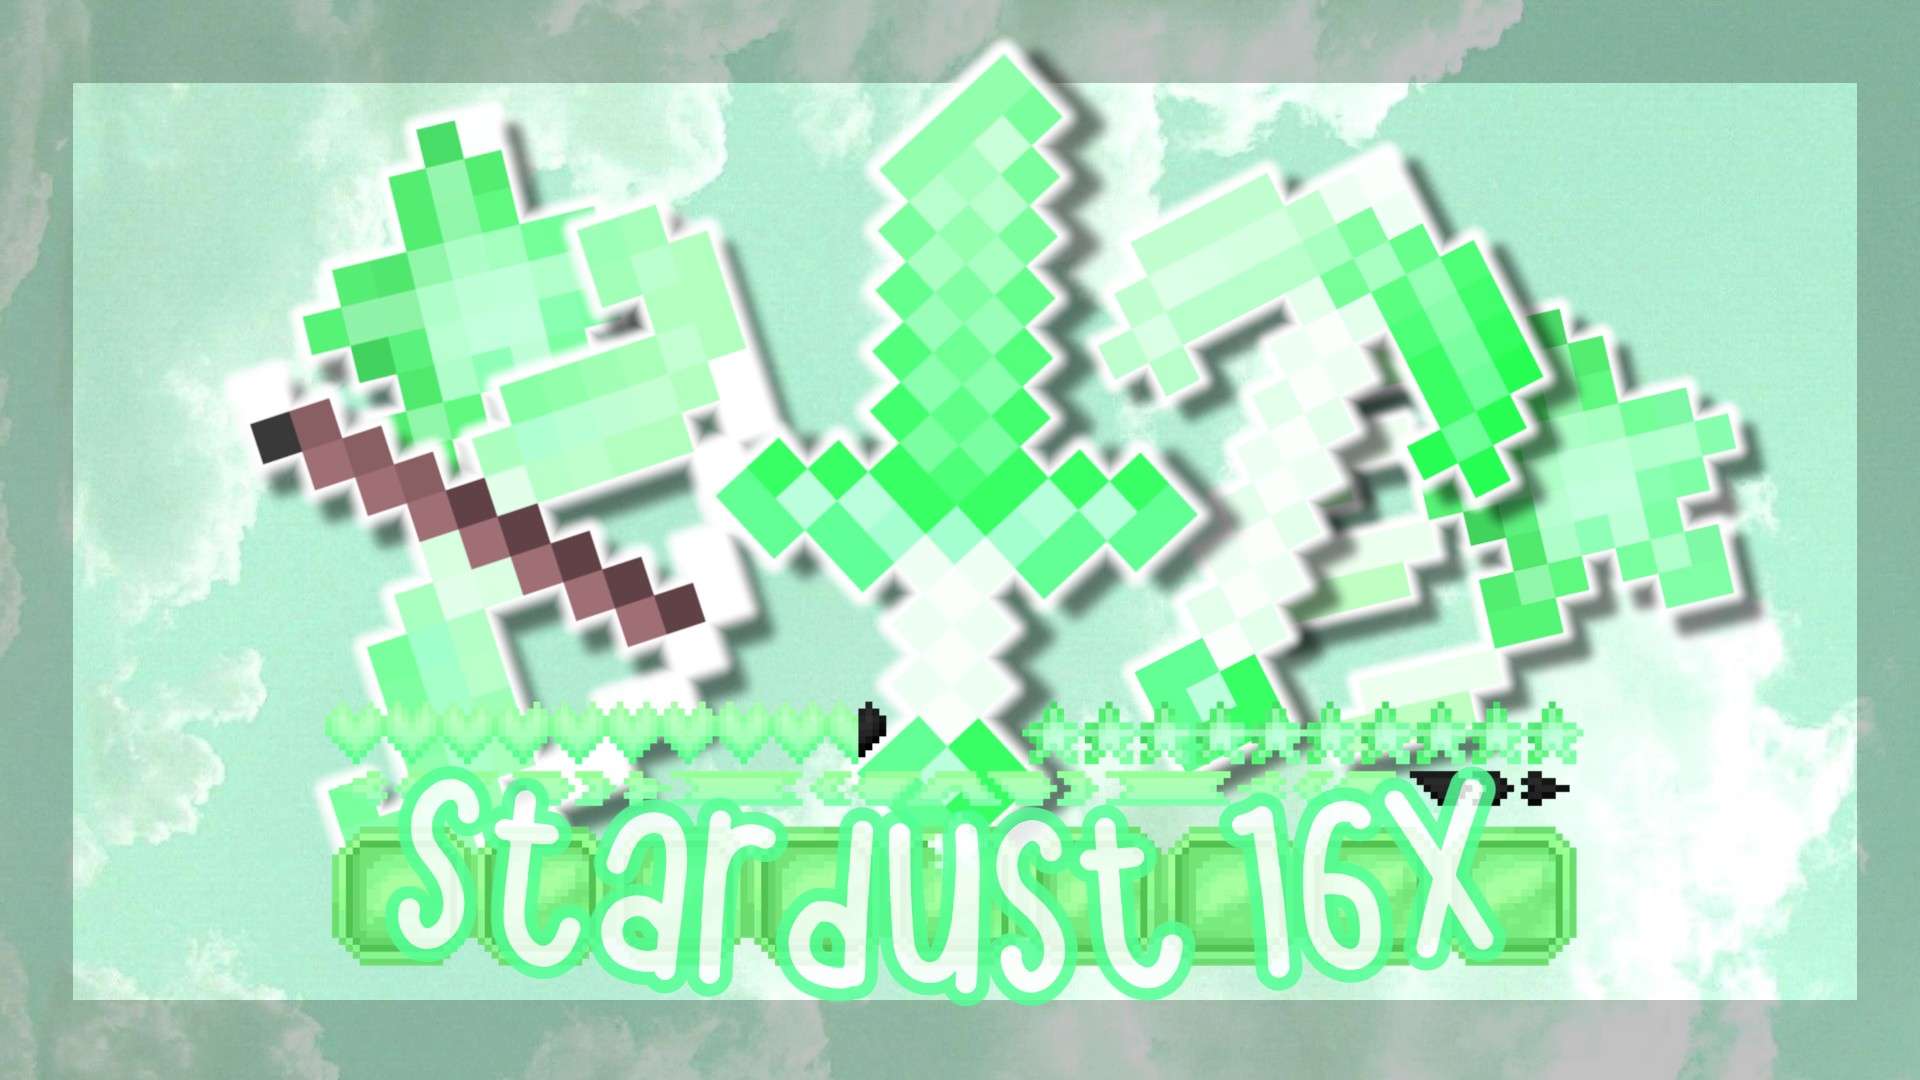 stardust 16 by veebri on PvPRP